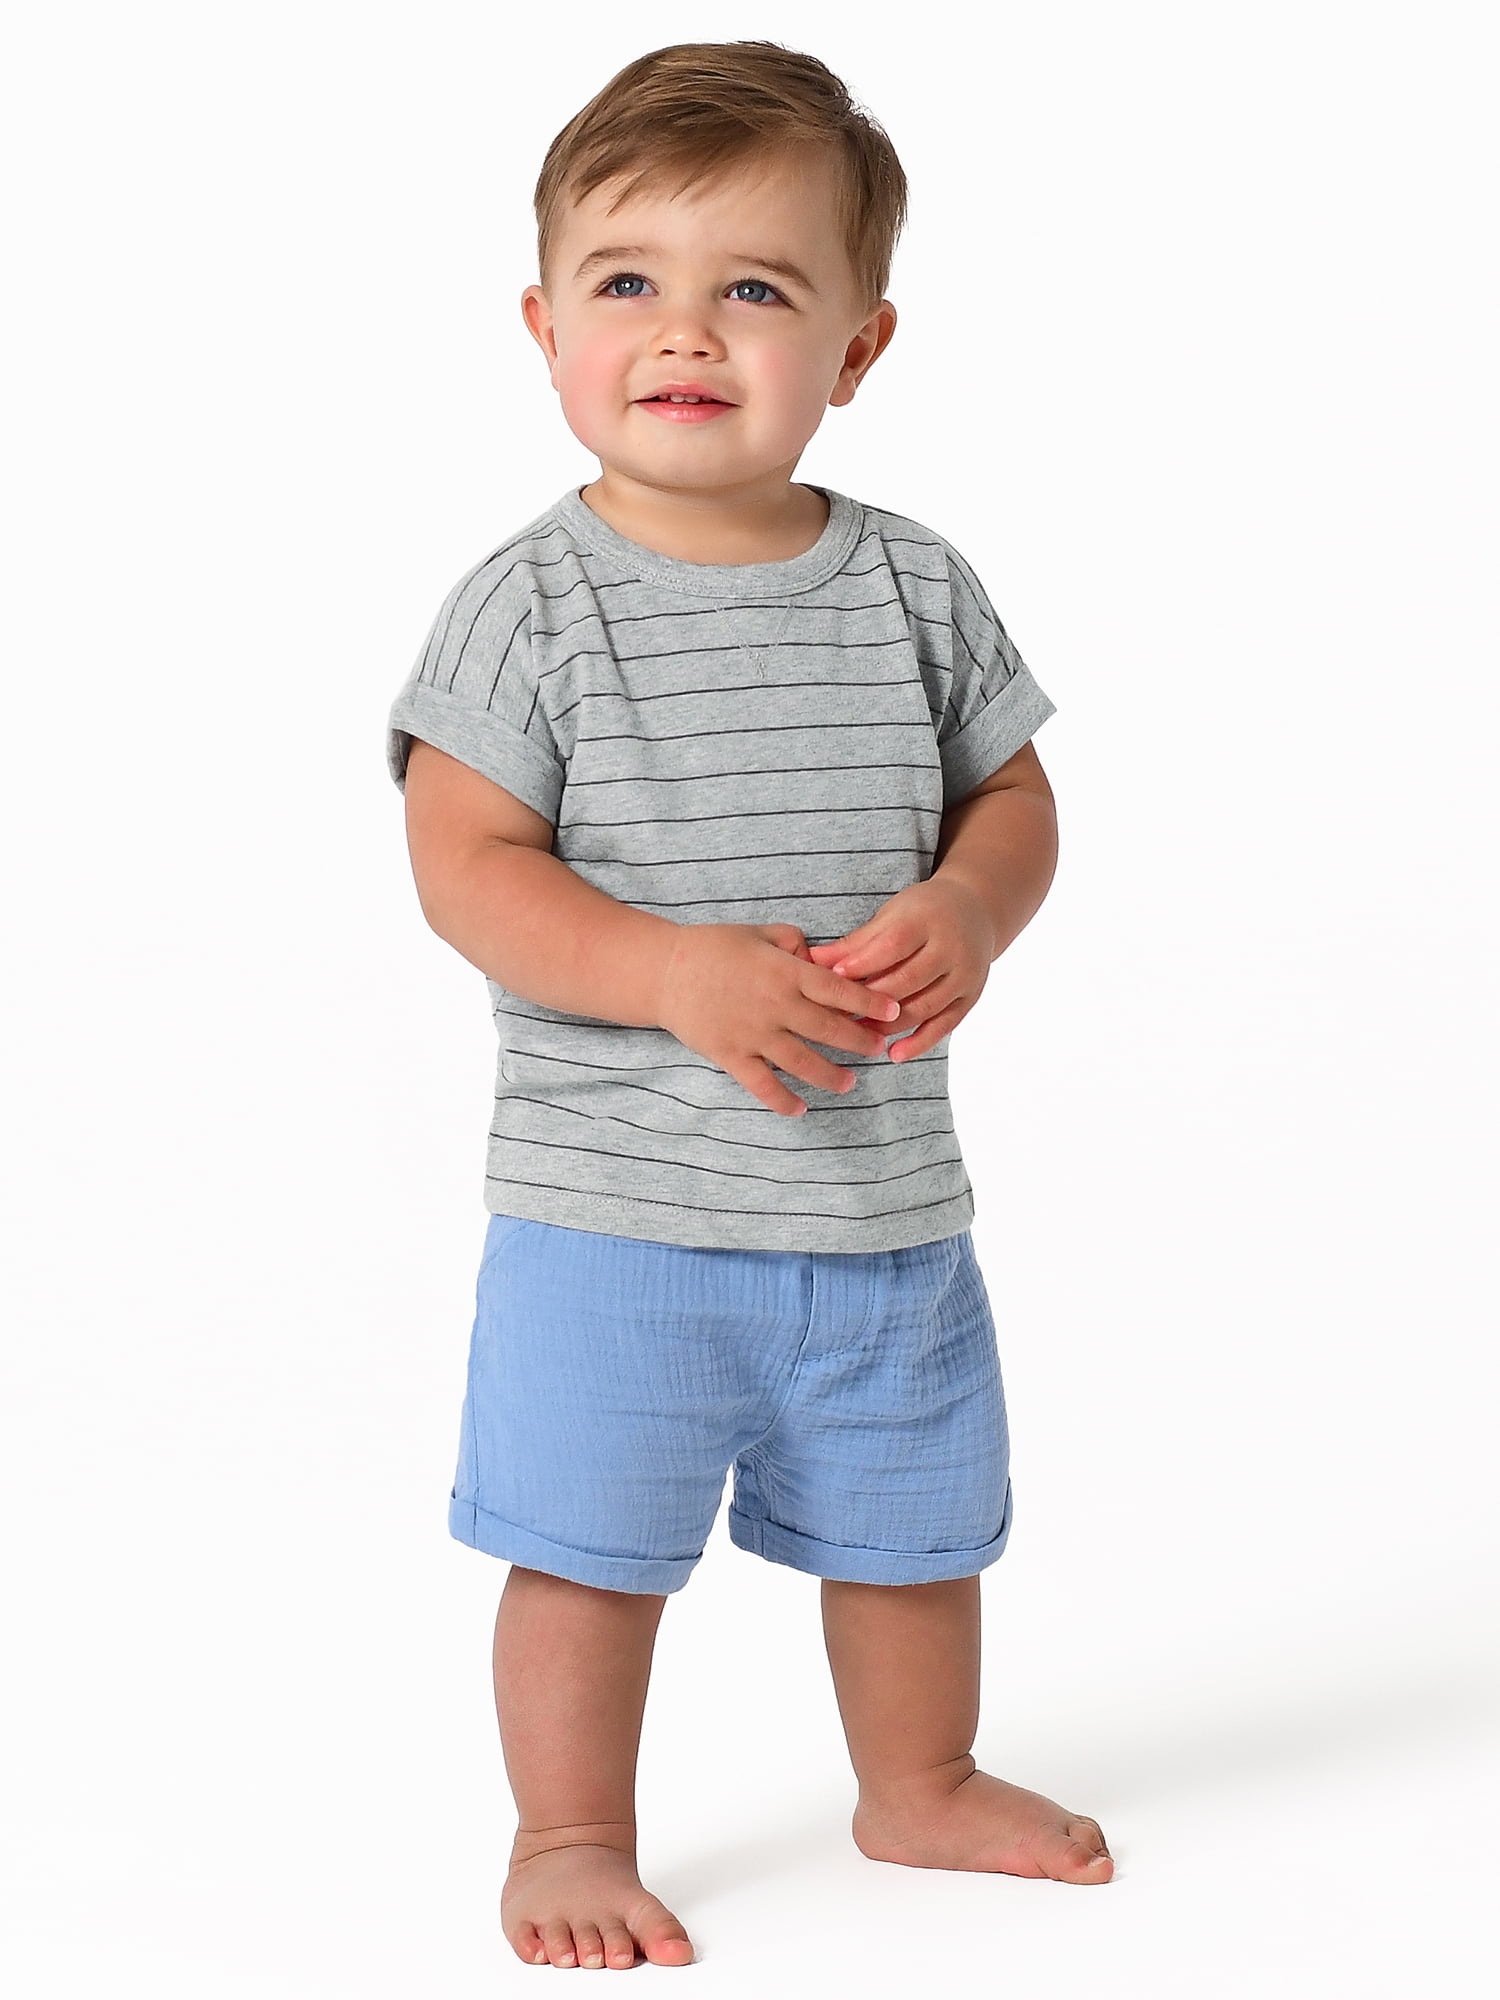 Modern Moments by Gerber Baby Boys Short Sleeve Tee and Gauze Shorts Outfit Set, 2-Piece, Sizes 0/3M-24M